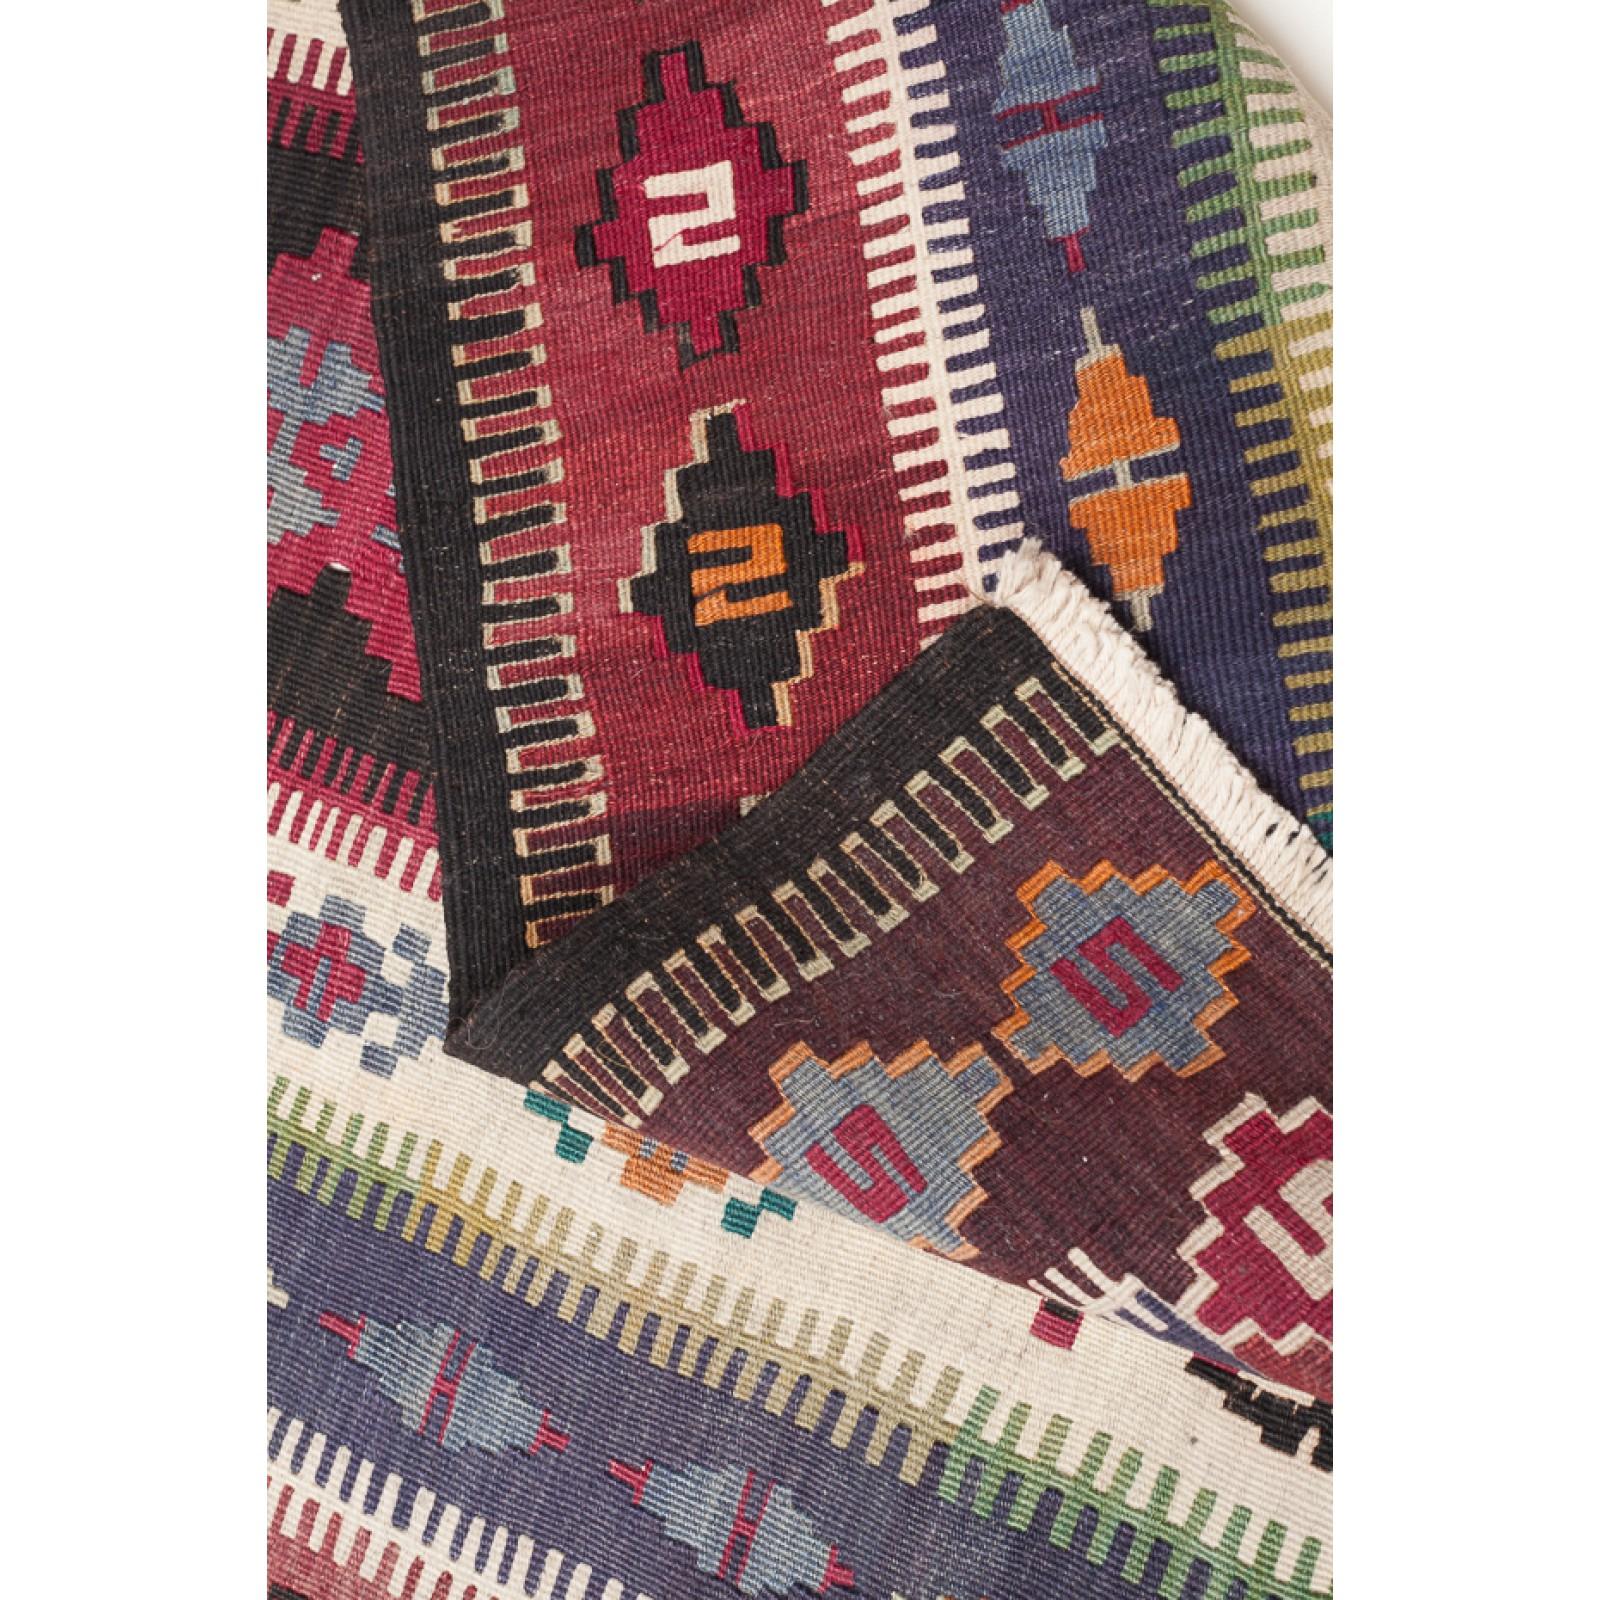 This is Central Anatolian Vintage Kilim from the Konya - Obruk region with a rare and beautiful color composition. 

This highly collectible antique kilim has a wonderful special color and texture that is typical of an old kilim in good condition.